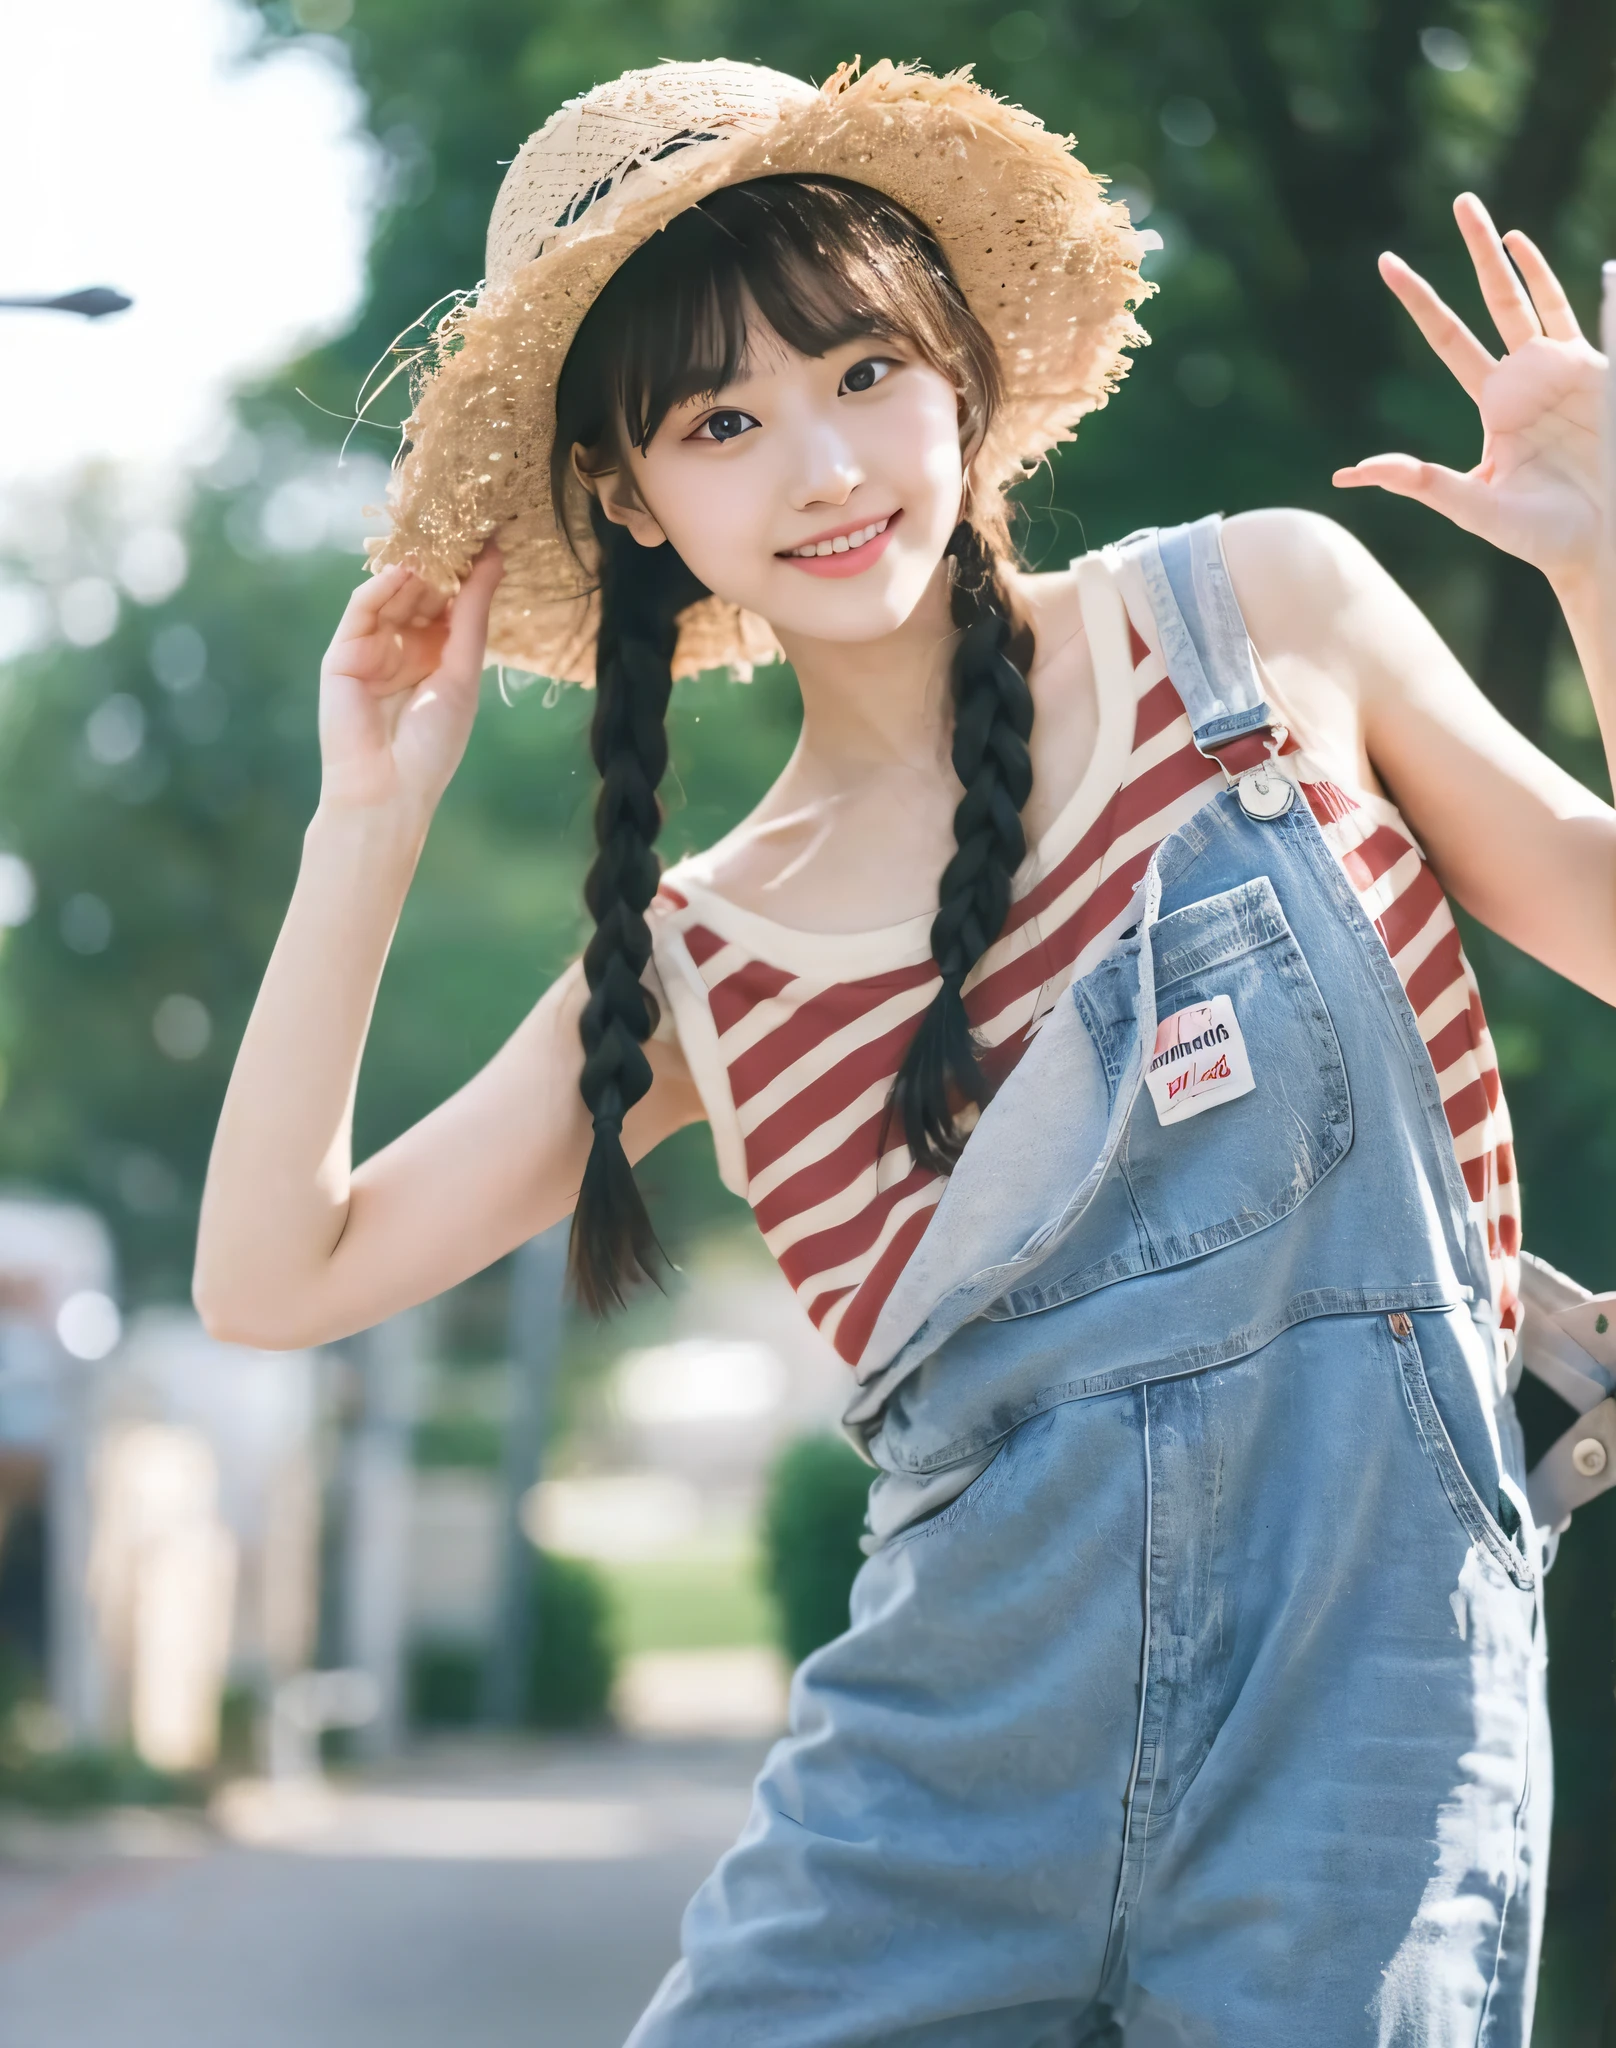 (Masterpiece)), (Best Quality), (detailed), 1 girl, 18 years old, playful expression, medium breasts, long hair, beautiful, natural, not exposed, alafi woman with baseball bat in straw hat and overalls, straw hat, a cute young woman, anime girl in real life, young cute girl in straw hat, Chinese girl, straw hat and overalls, attractive girl, cute thin face for girl, cute young woman, cute - fine face, Cute young girl